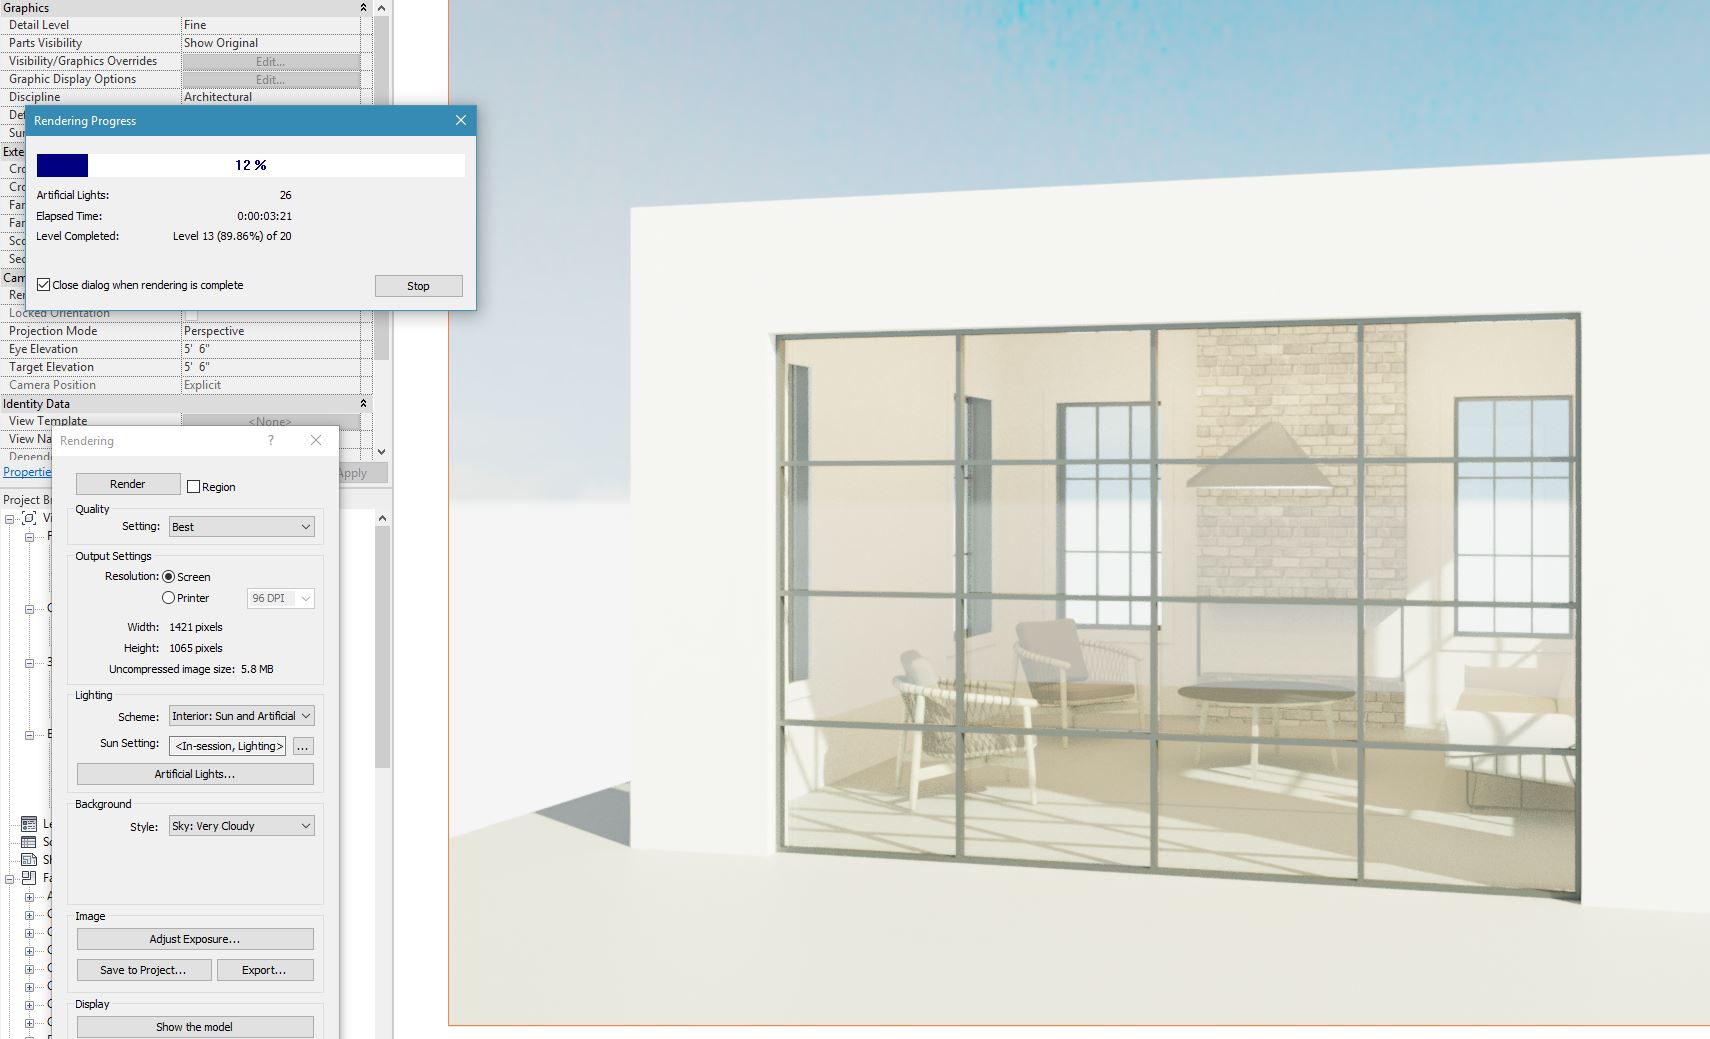 Artificial Lights not working - Autodesk Community - Revit Products